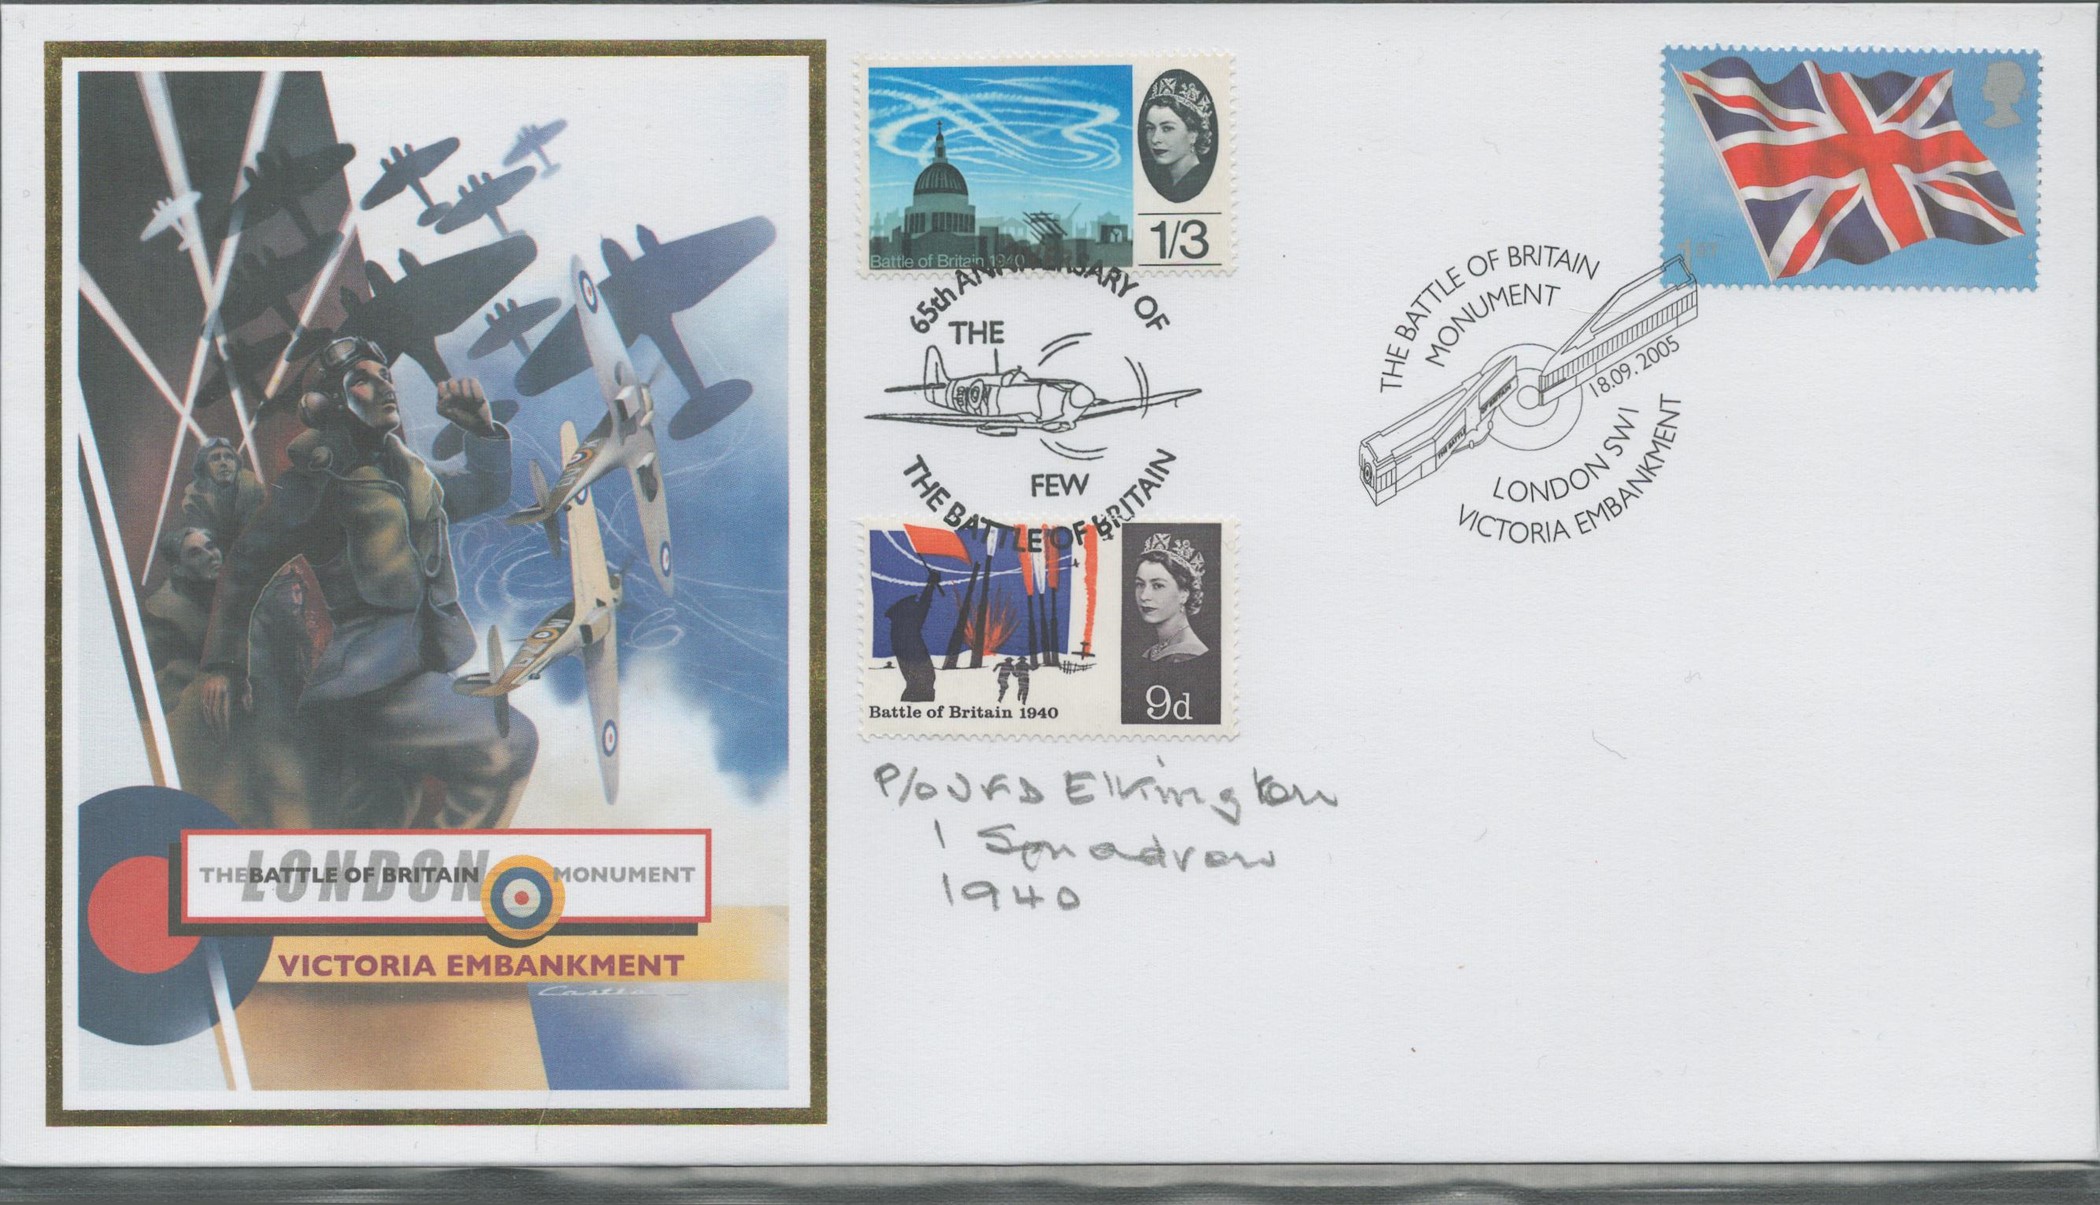 Wg Cdr Tim Elkington Signed The Battle of Britain London Monument First Day Cover. 3 British